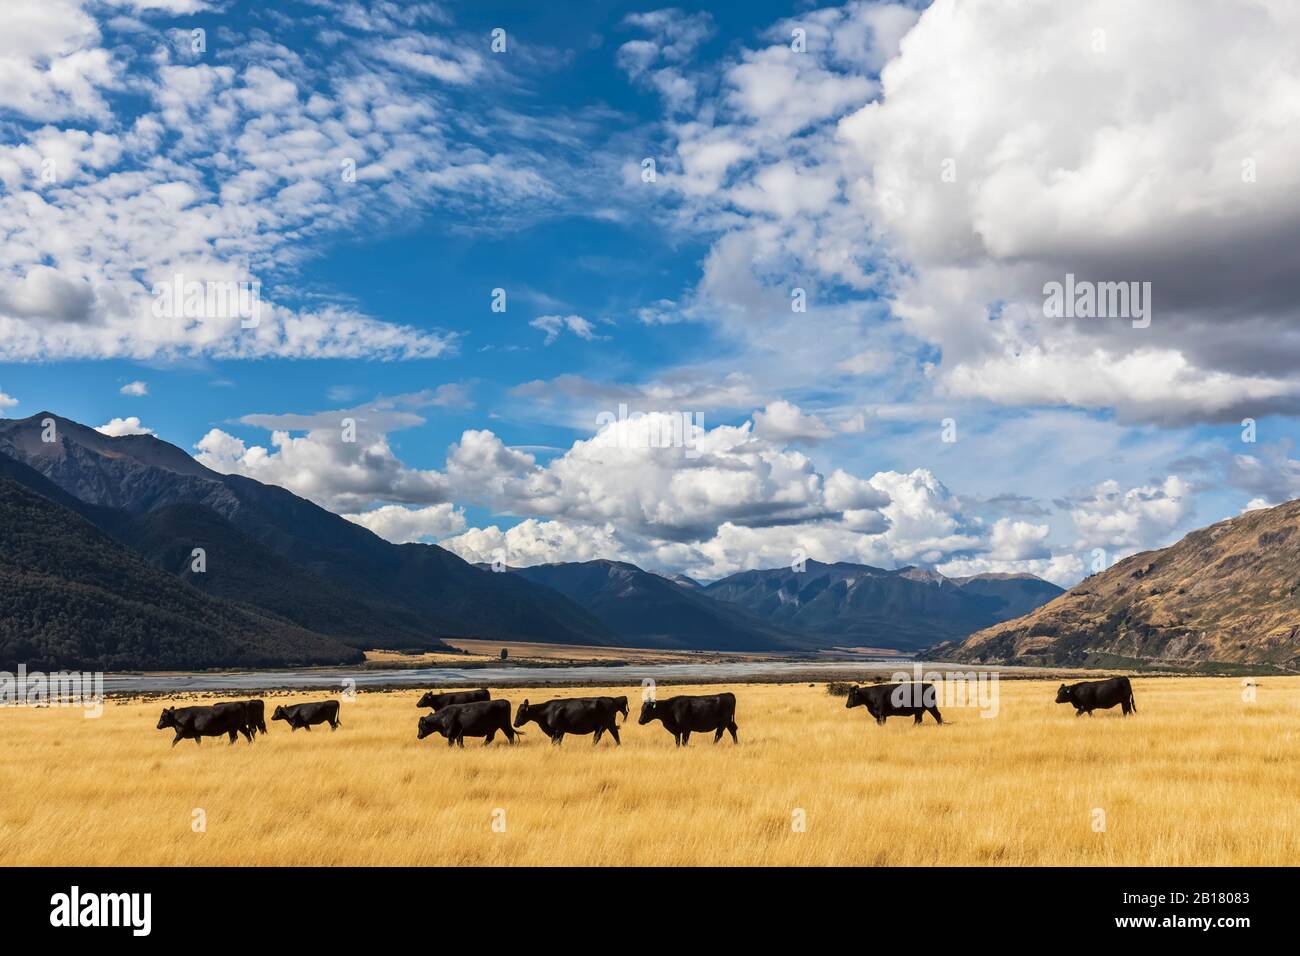 New Zealand, Grey District, Inchbonnie, Clouds over cattle grazing on yellow grass with Waimakariri River in background Stock Photo